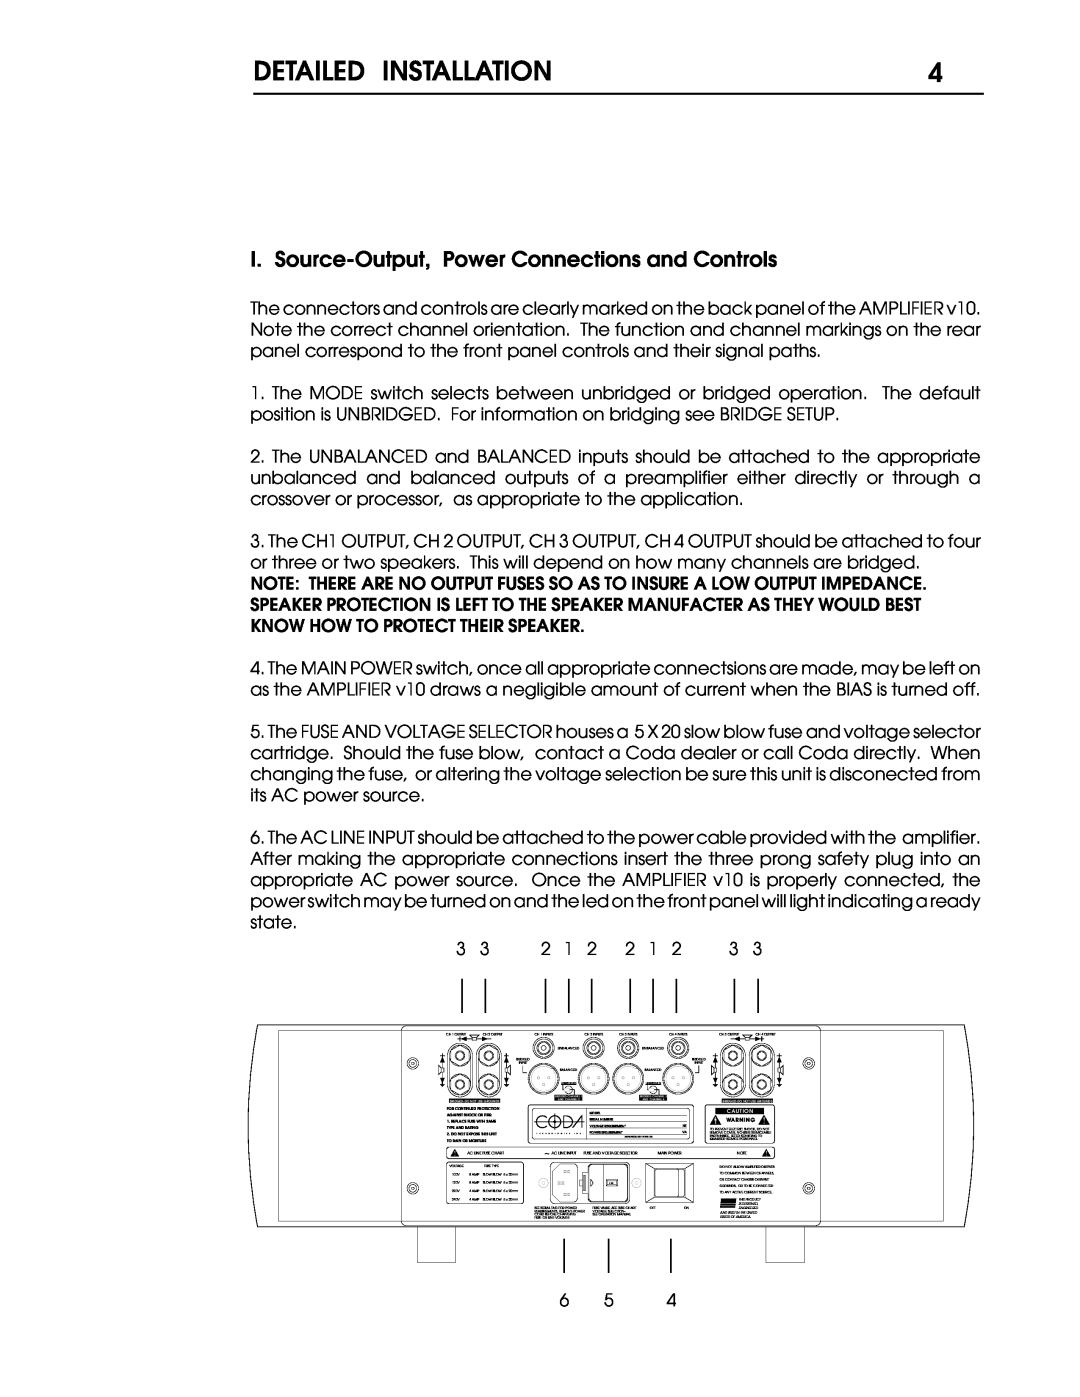 Coda V10 operation manual I. Source-Output,Power Connections and Controls 